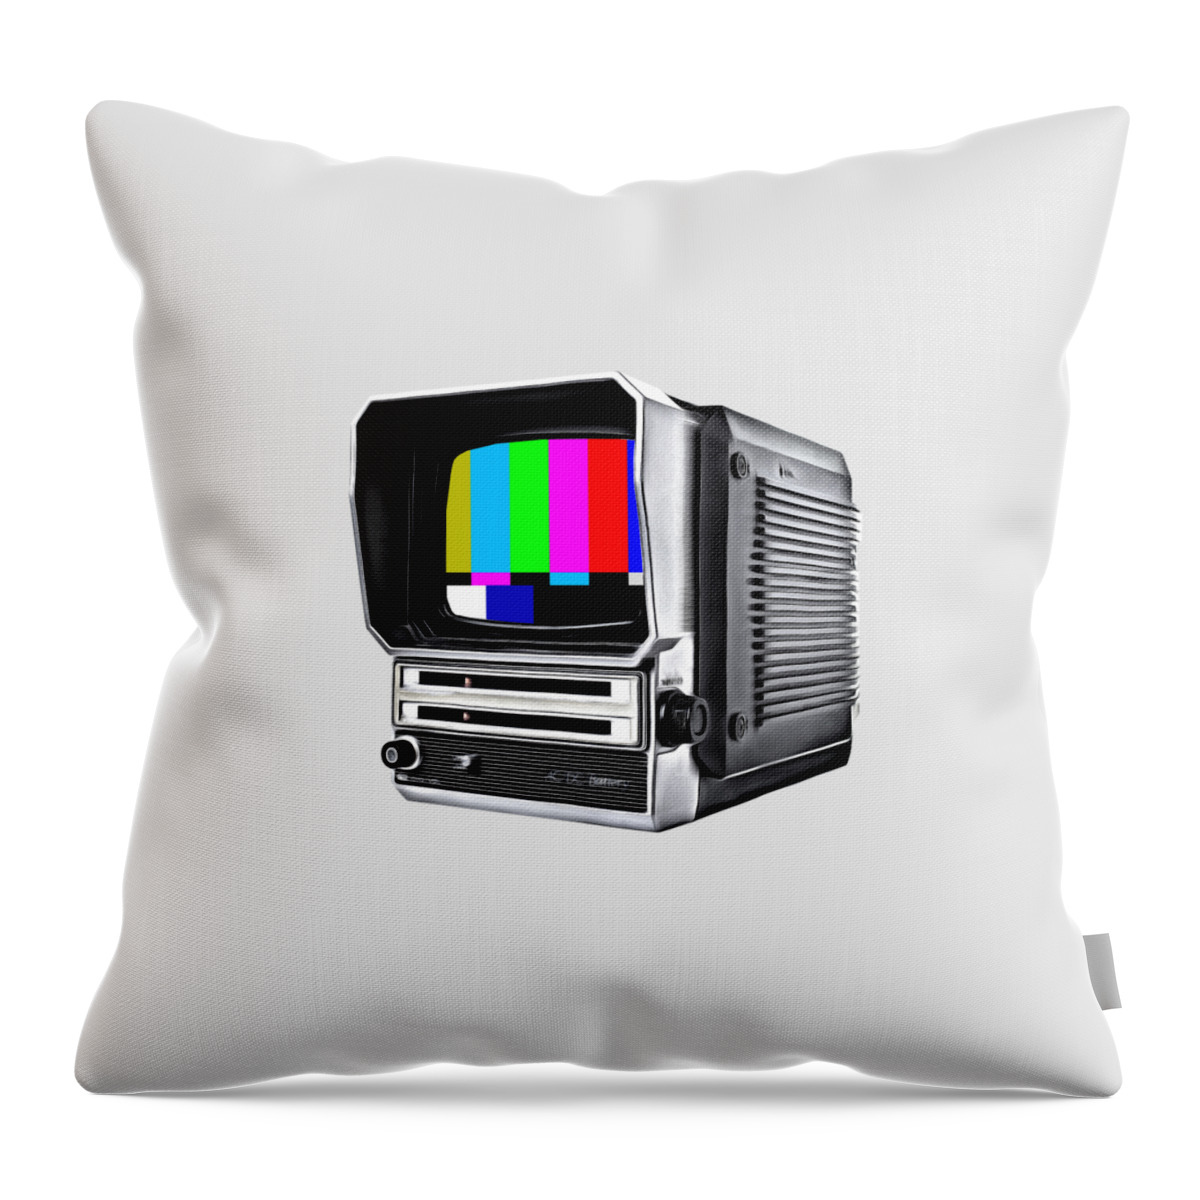 Tv Throw Pillow featuring the photograph Off Air Tee by Edward Fielding